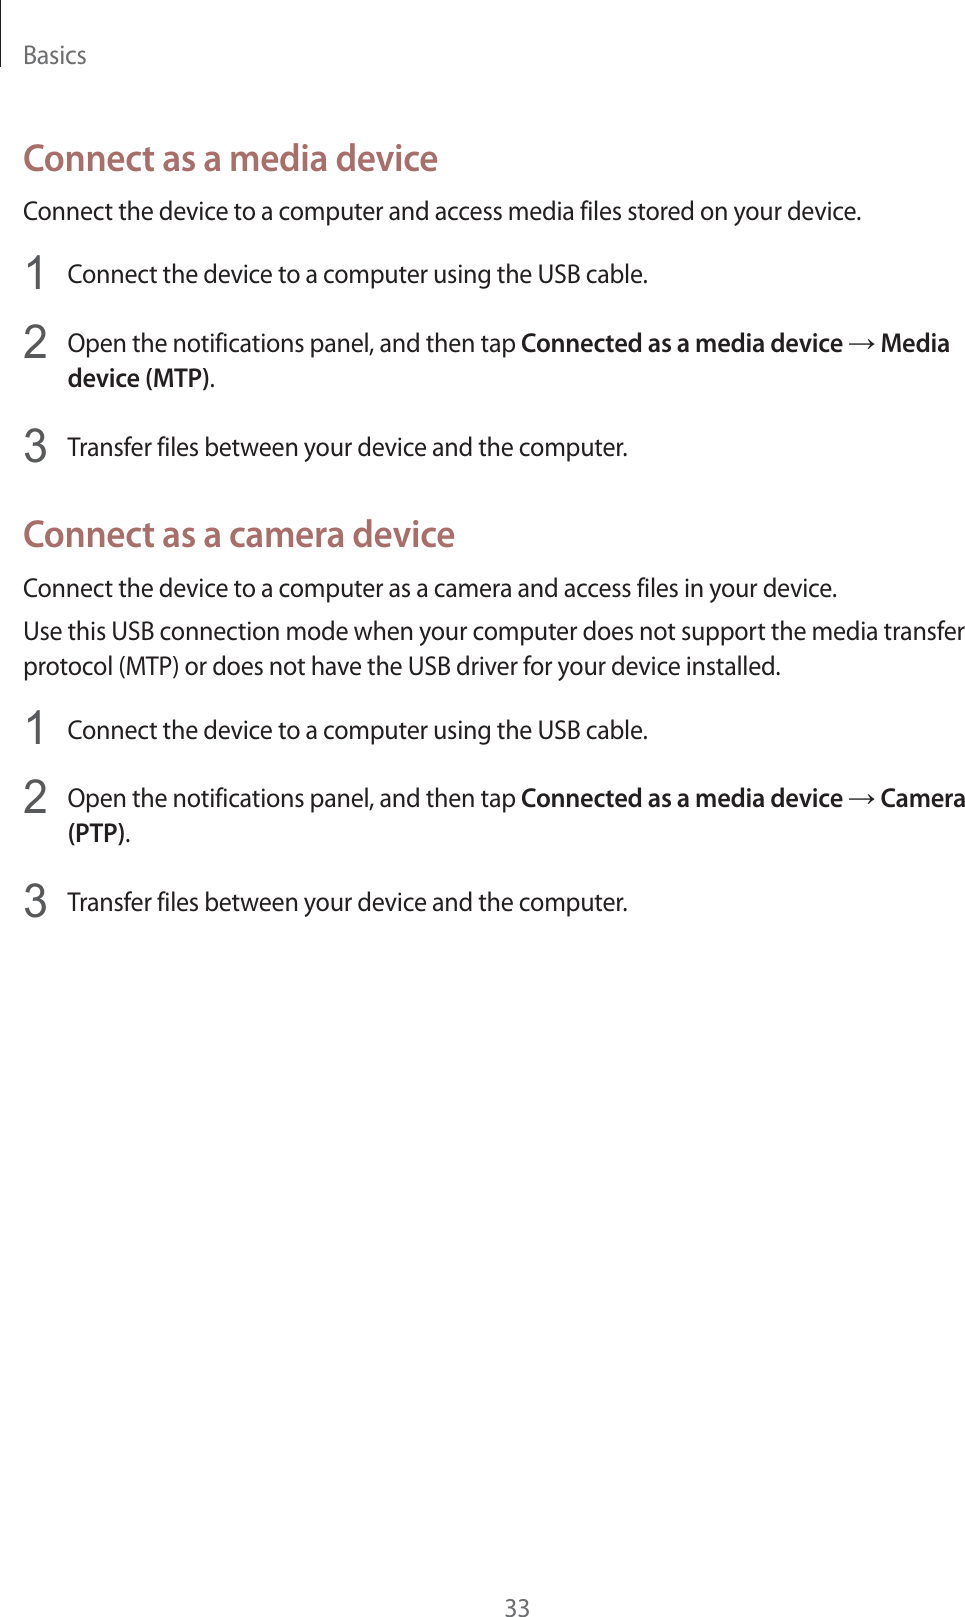 Basics33Connect as a media deviceConnect the device to a computer and access media files stored on your device.1Connect the device to a computer using the USB cable.2Open the notifications panel, and then tap Connected as a media device ĺ Media device (MTP).3Transfer files between your device and the computer.Connect as a camera deviceConnect the device to a computer as a camera and access files in your device.Use this USB connection mode when your computer does not support the media transfer protocol (MTP) or does not have the USB driver for your device installed.1Connect the device to a computer using the USB cable.2Open the notifications panel, and then tap Connected as a media device ĺ Camera (PTP).3Transfer files between your device and the computer.